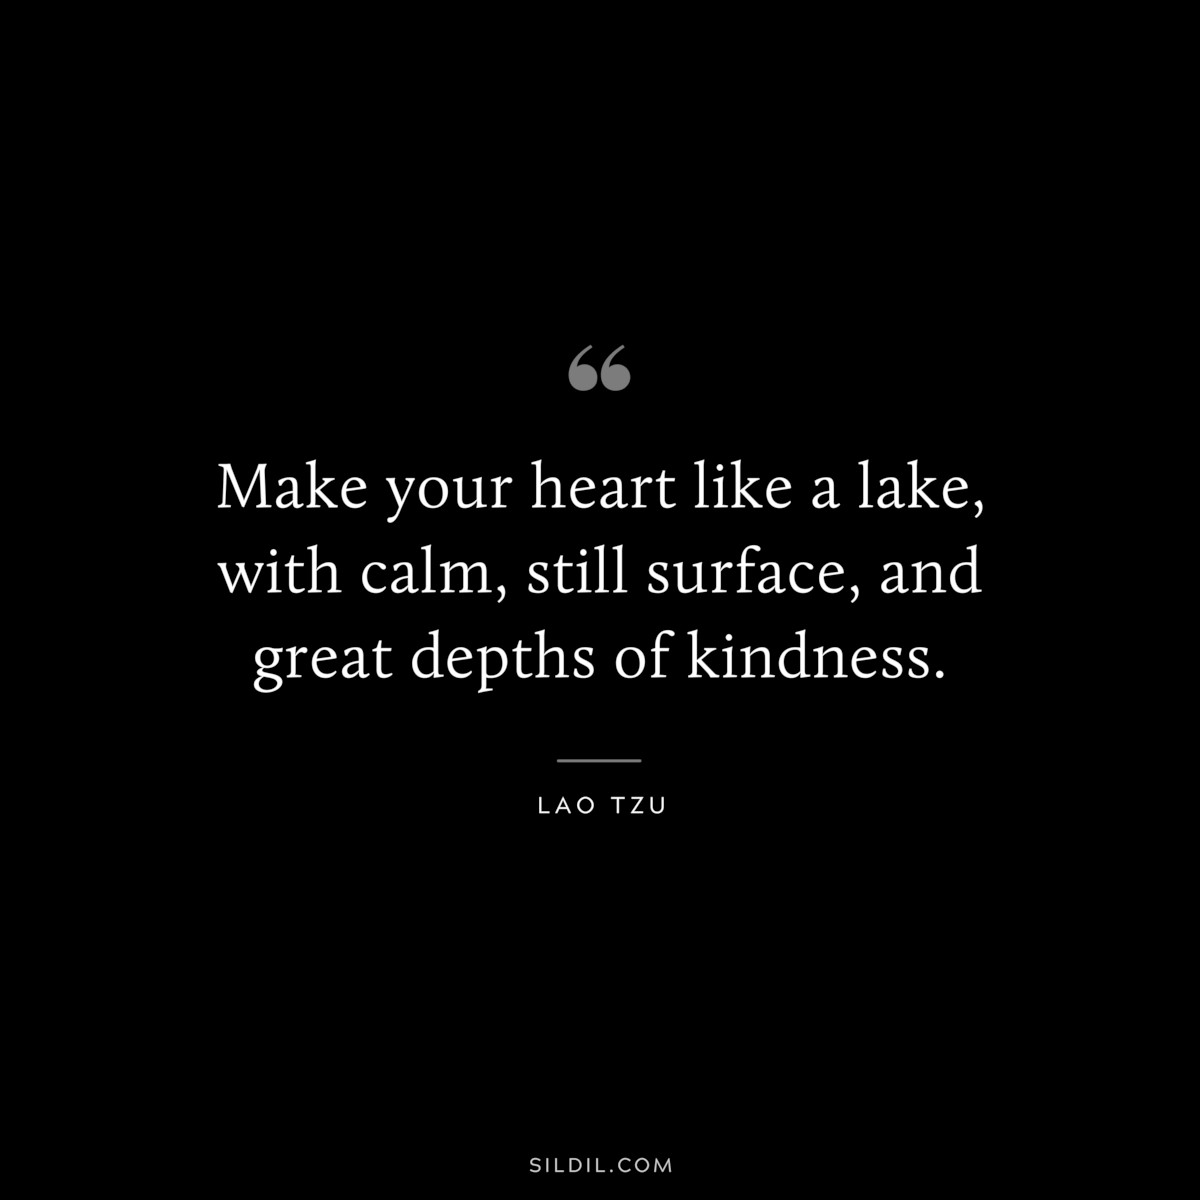 Make your heart like a lake, with calm, still surface, and great depths of kindness. ― Lao Tzu